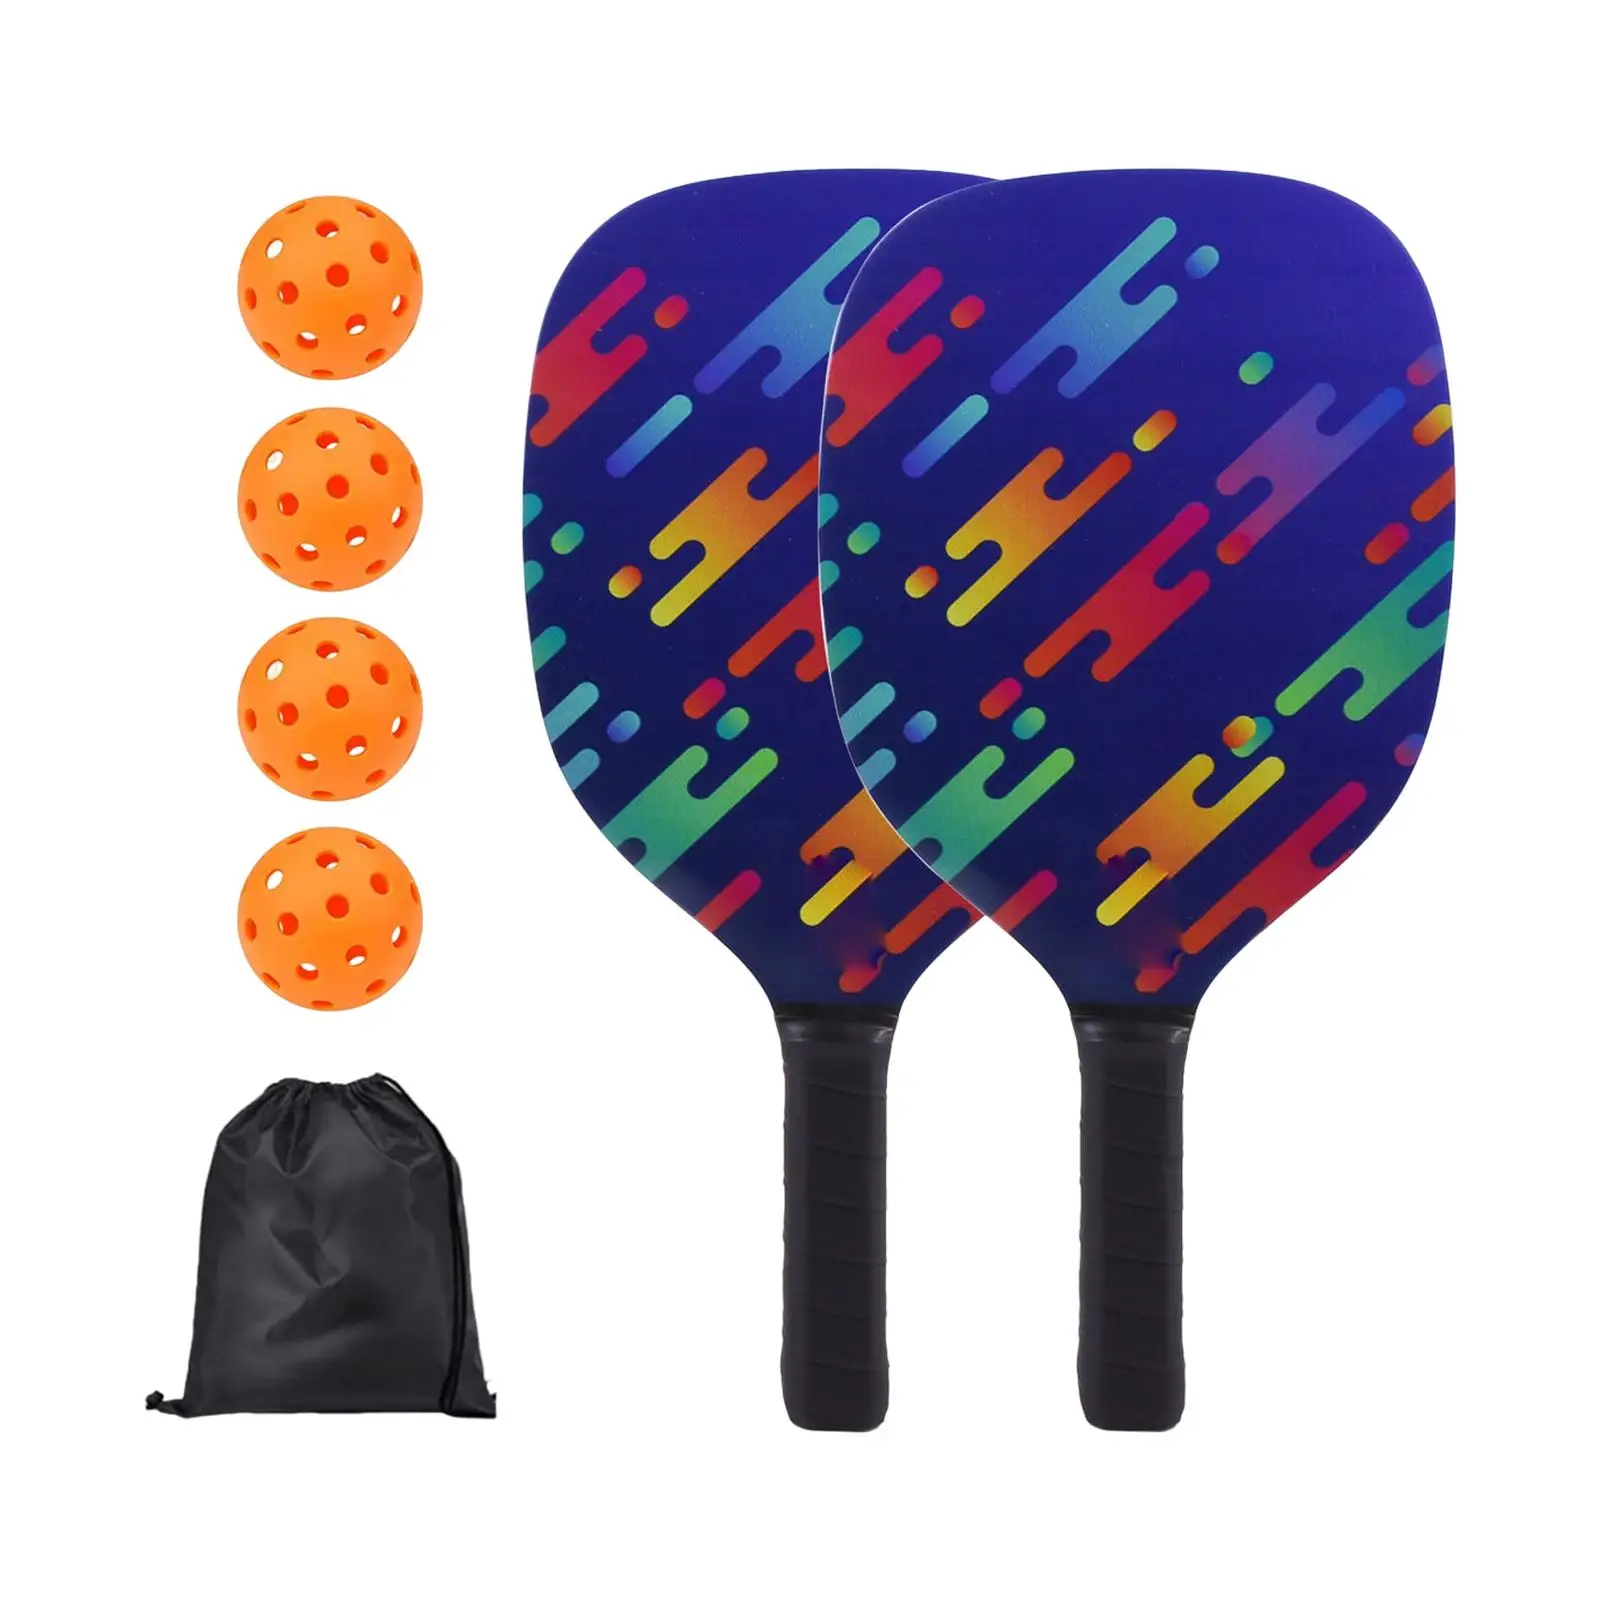 

Professional Pickleball Paddle Racket Rackets 4 Pickleballs Carrying Bag with Comfort Grip Wood for Outdoor Women Men Sports